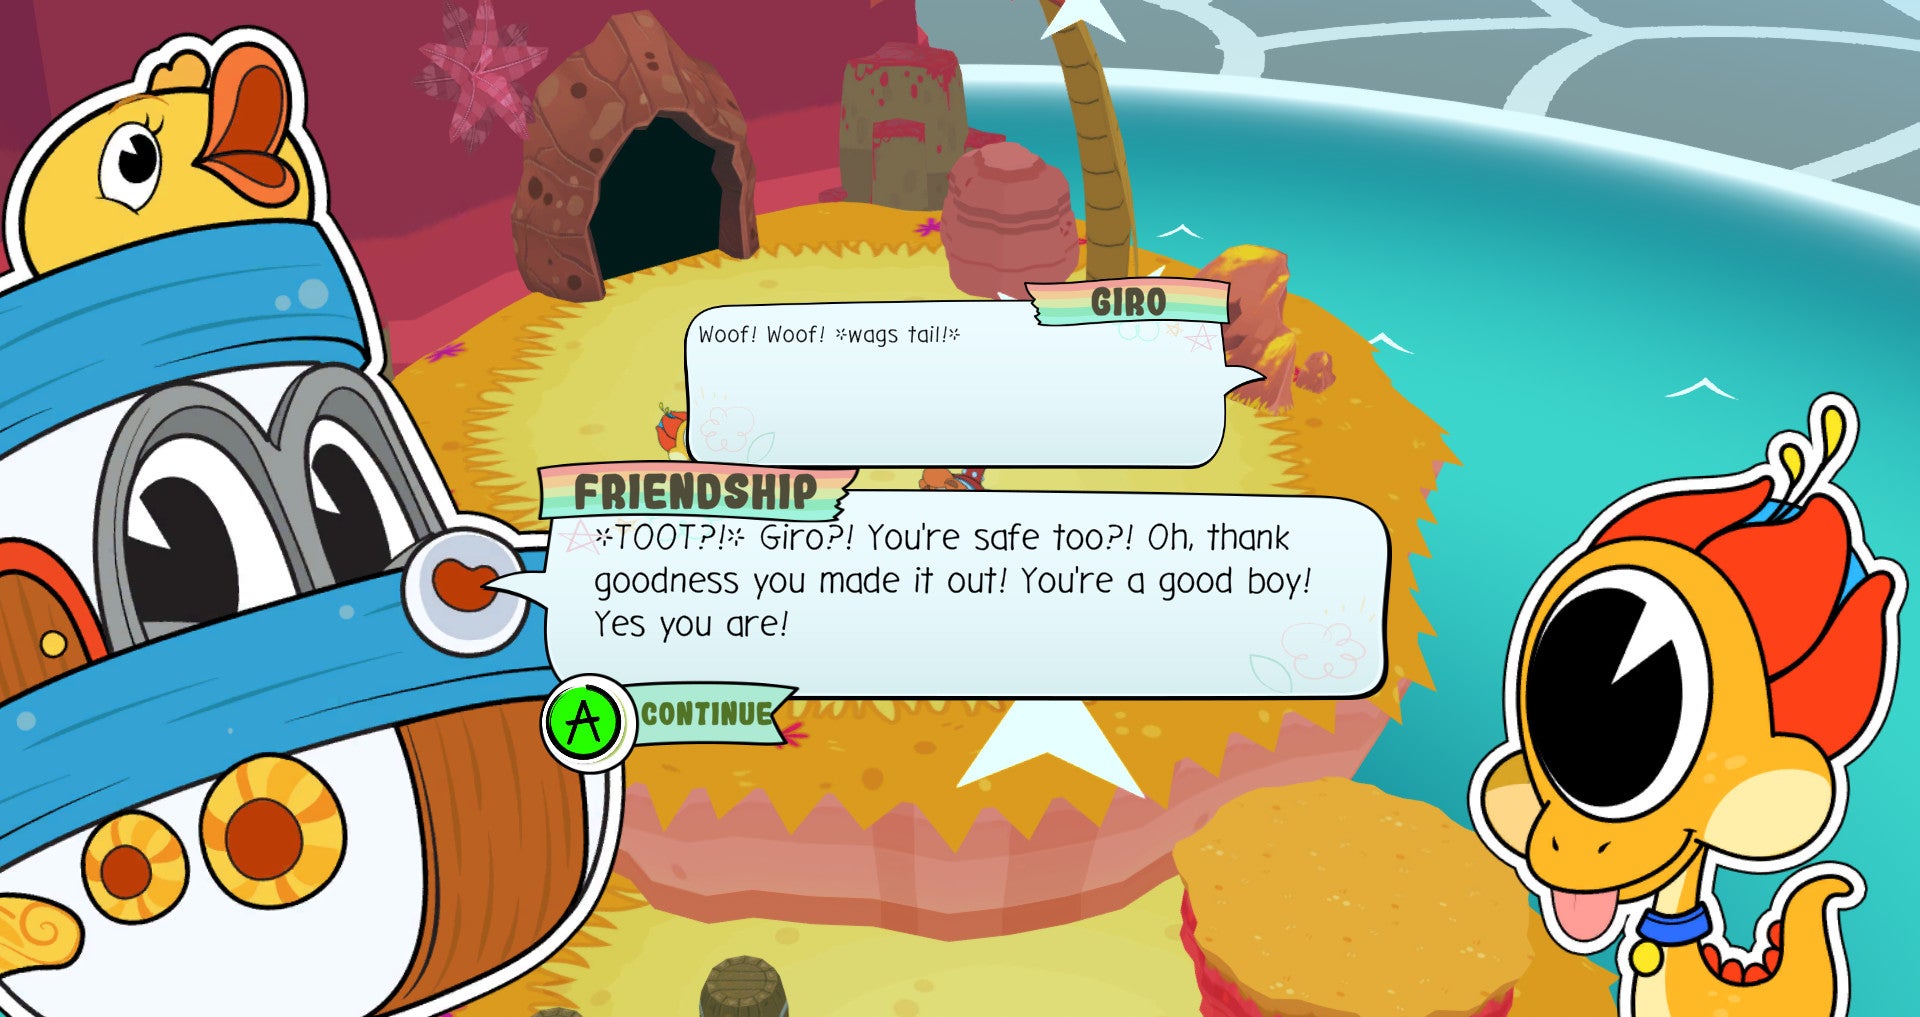 A screenshot from Rainbow Billy showing a colourful boat (with eyes) called Friendship, talking to a dog-lizard creature